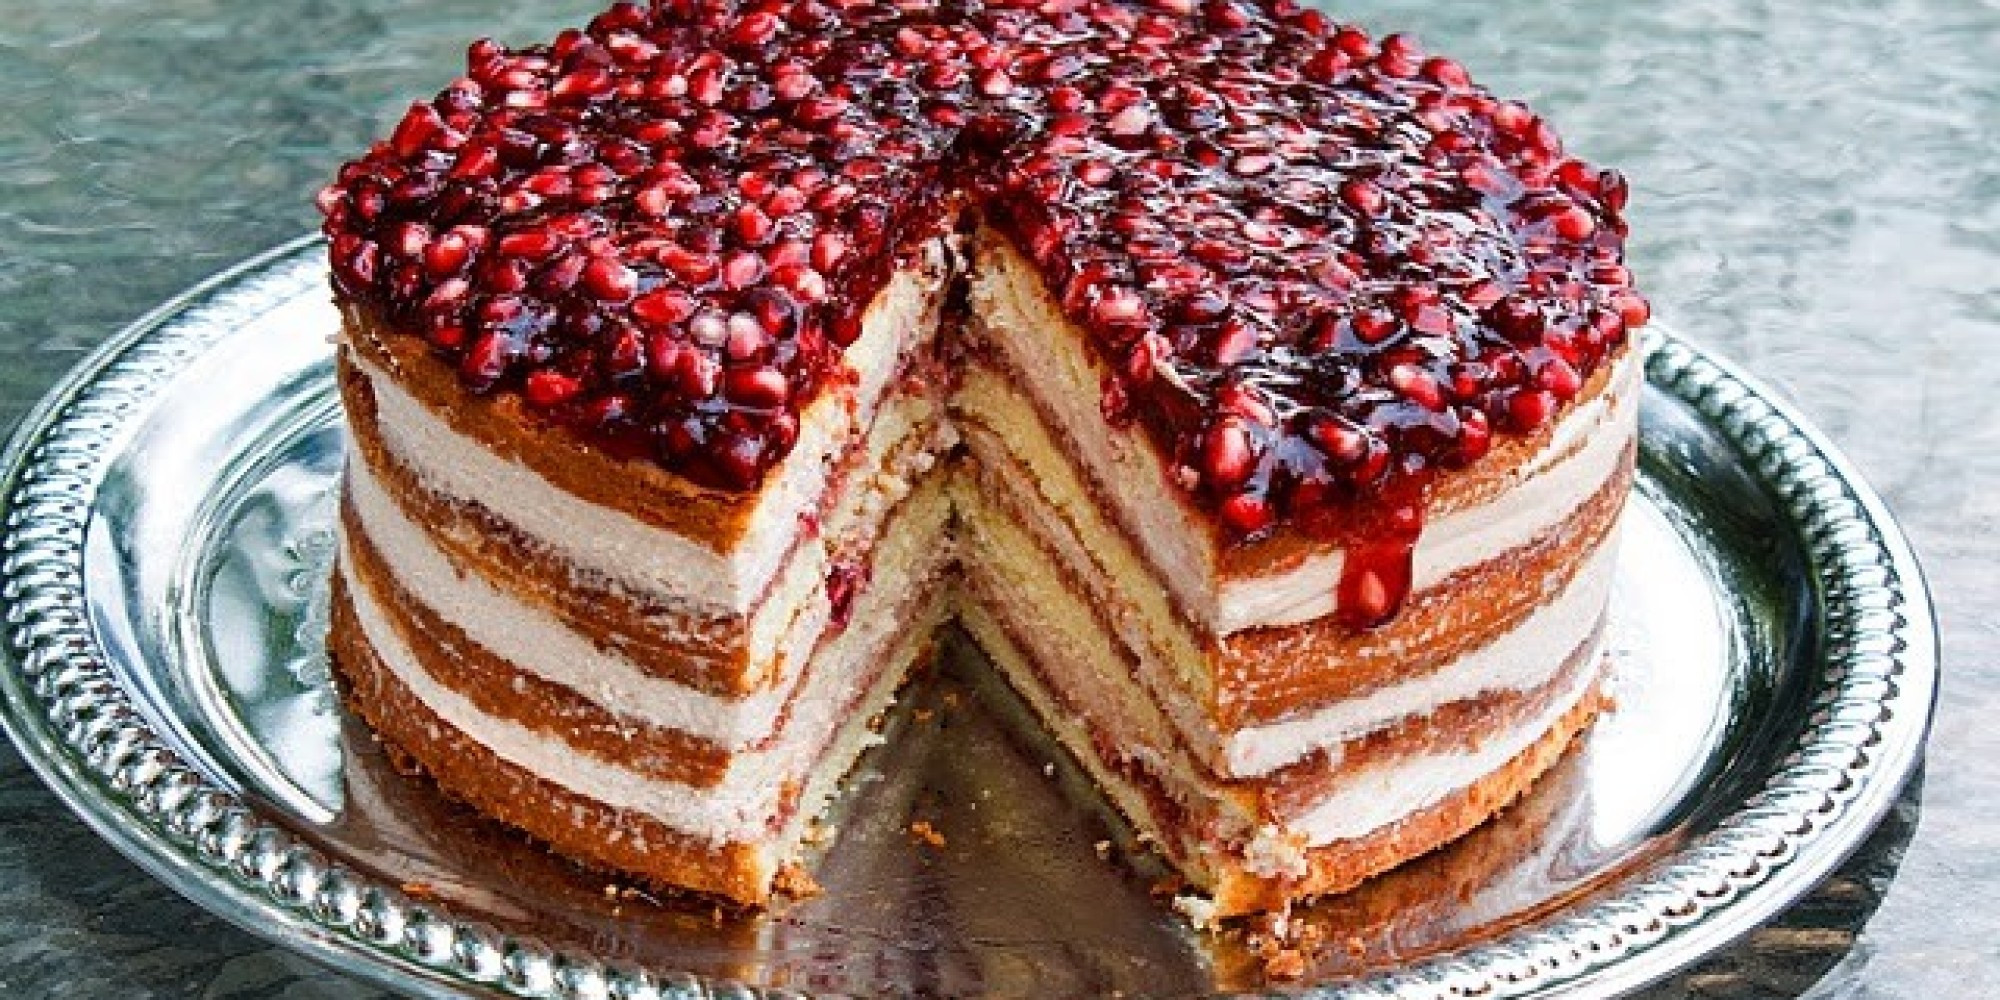 Desserts For The Holiday
 The Most Stunning Christmas Dessert Recipes Ever